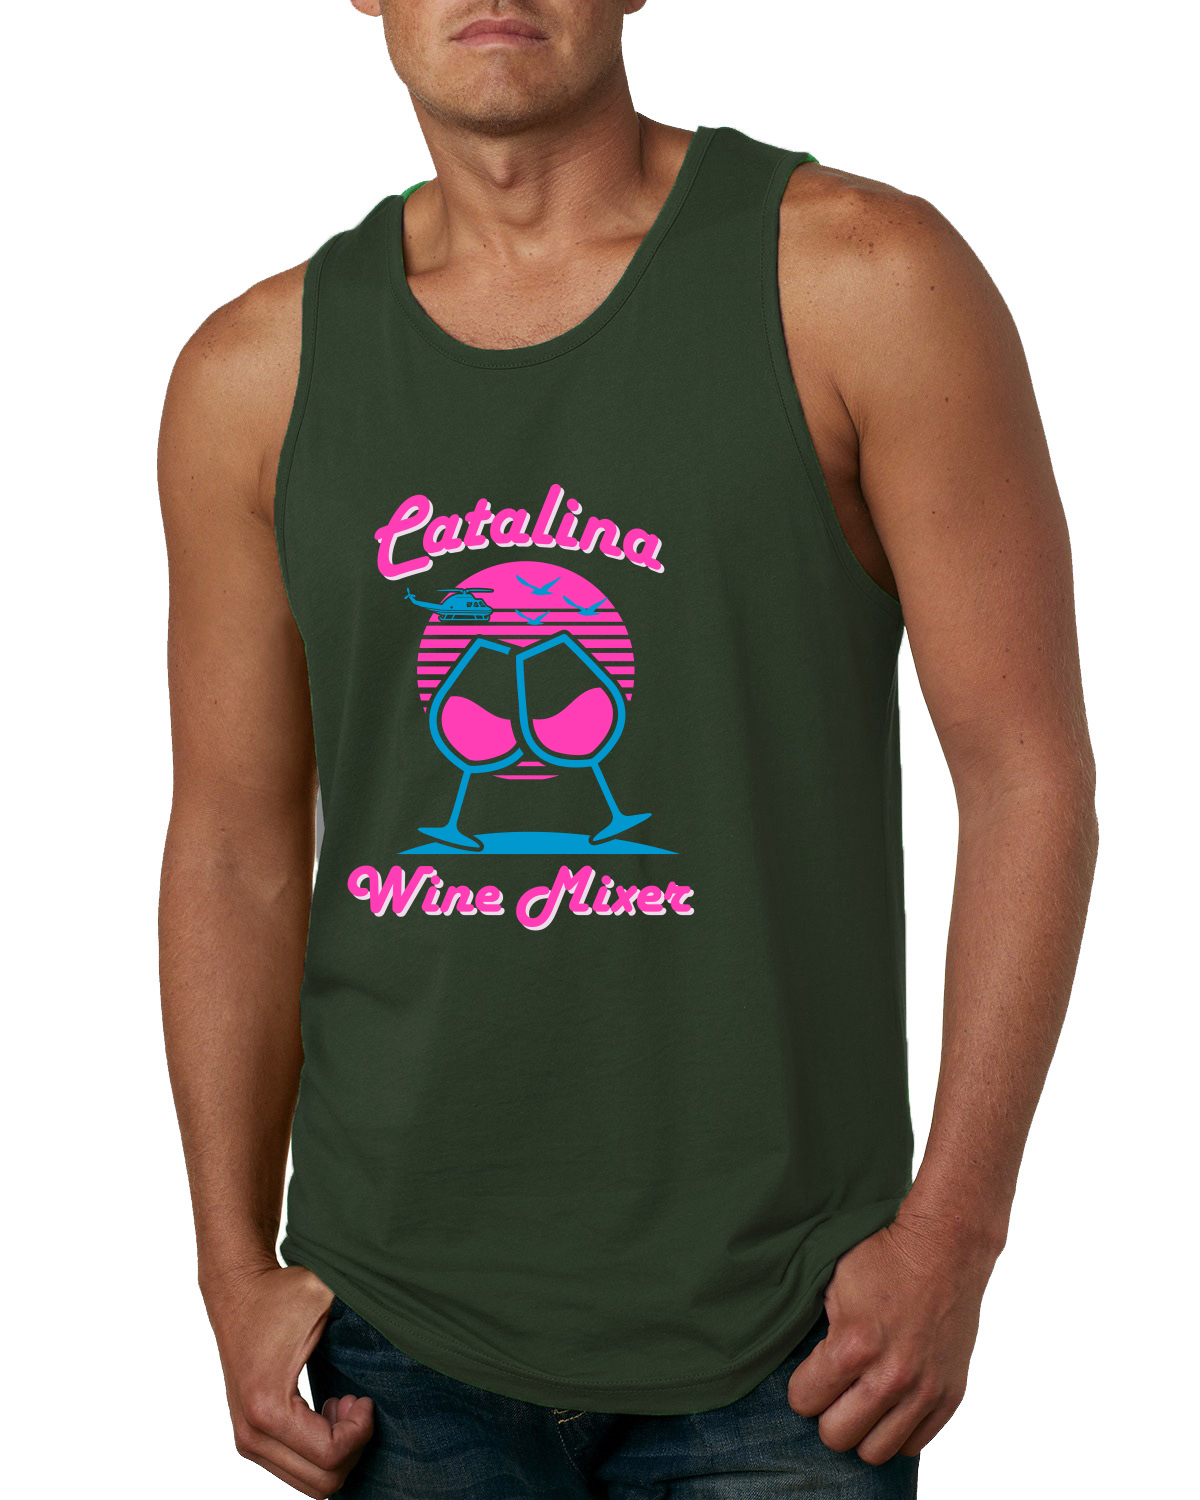 Catalina Wine Mixer Island Prestige Movie| Mens Pop Culture Graphic Tank Top, Forest Green, Large - image 1 of 4